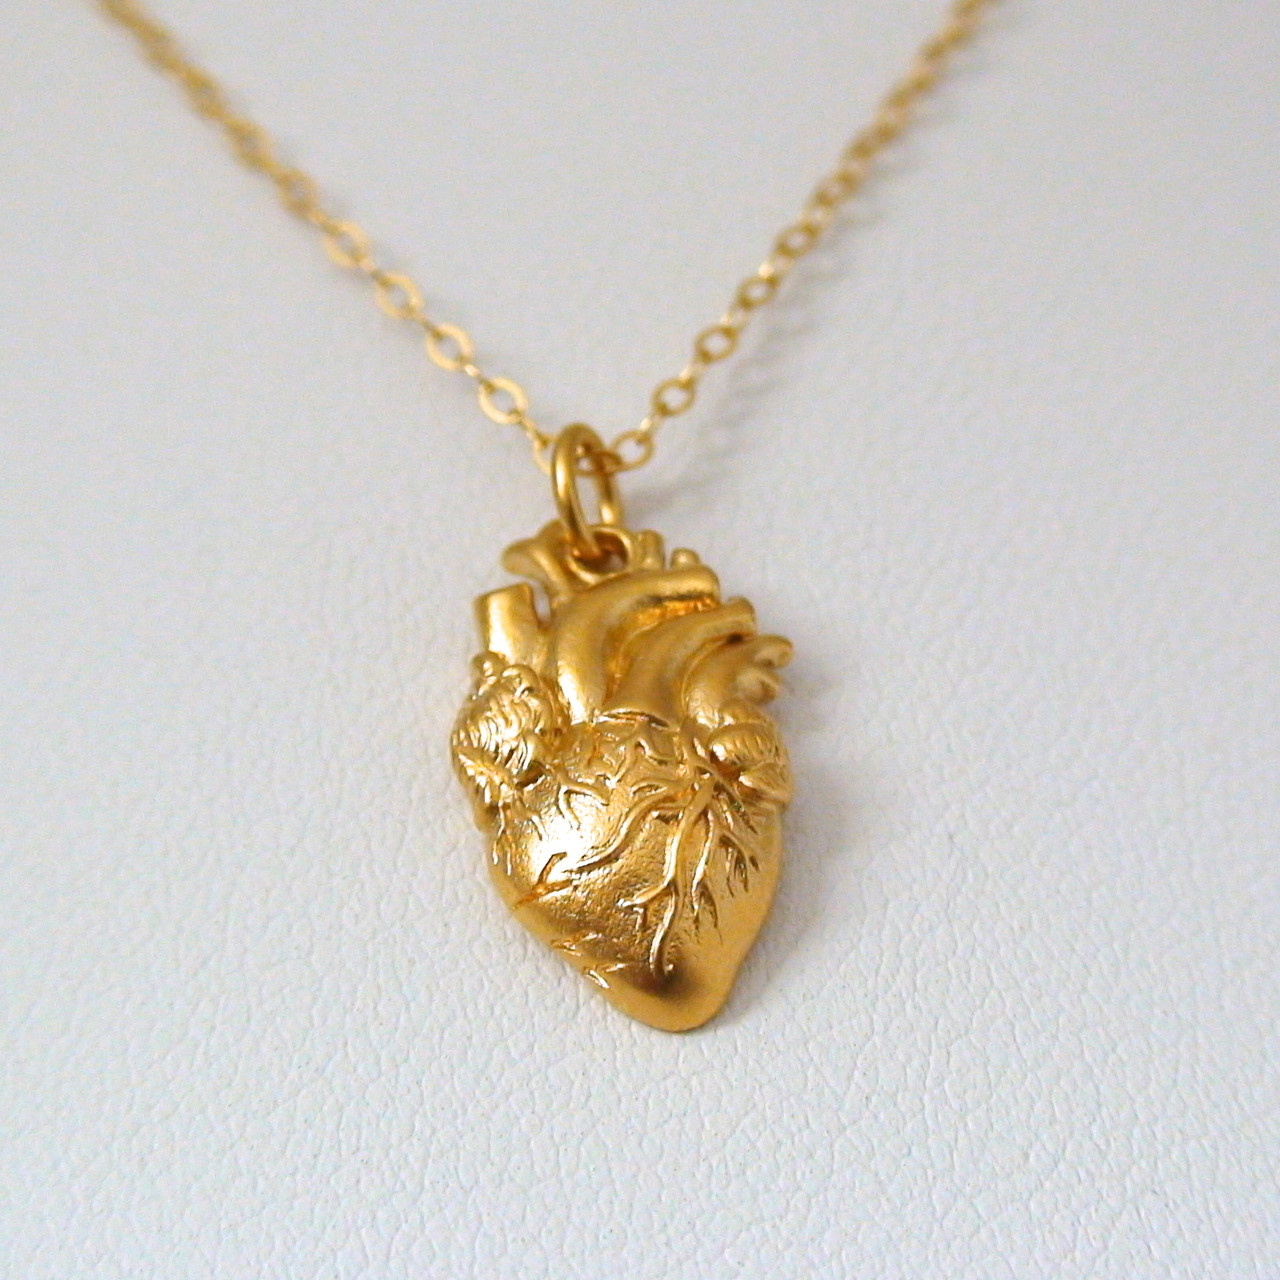 24K Gold Plate Sterling Silver Anatomical Heart Necklace